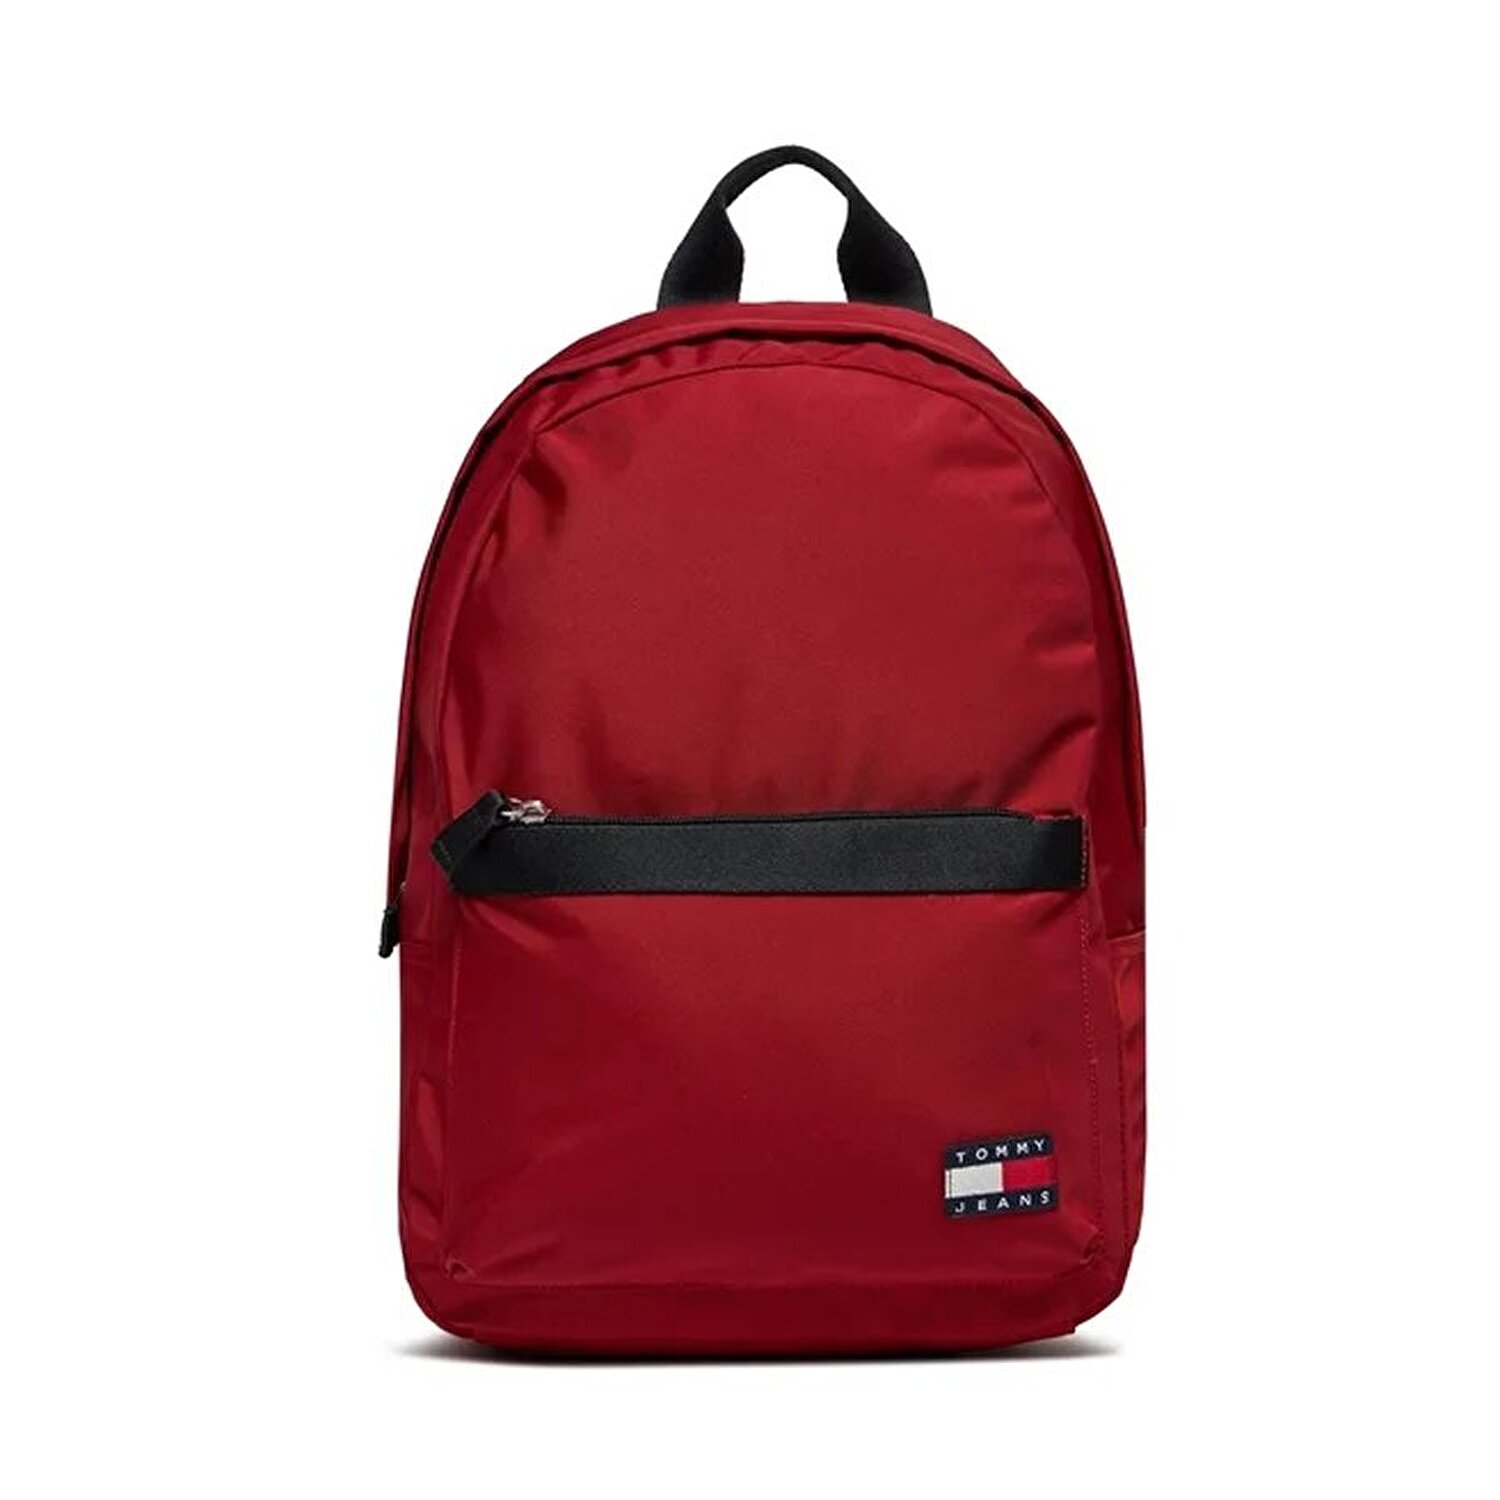 TJM DAILY DOME BACKPACK